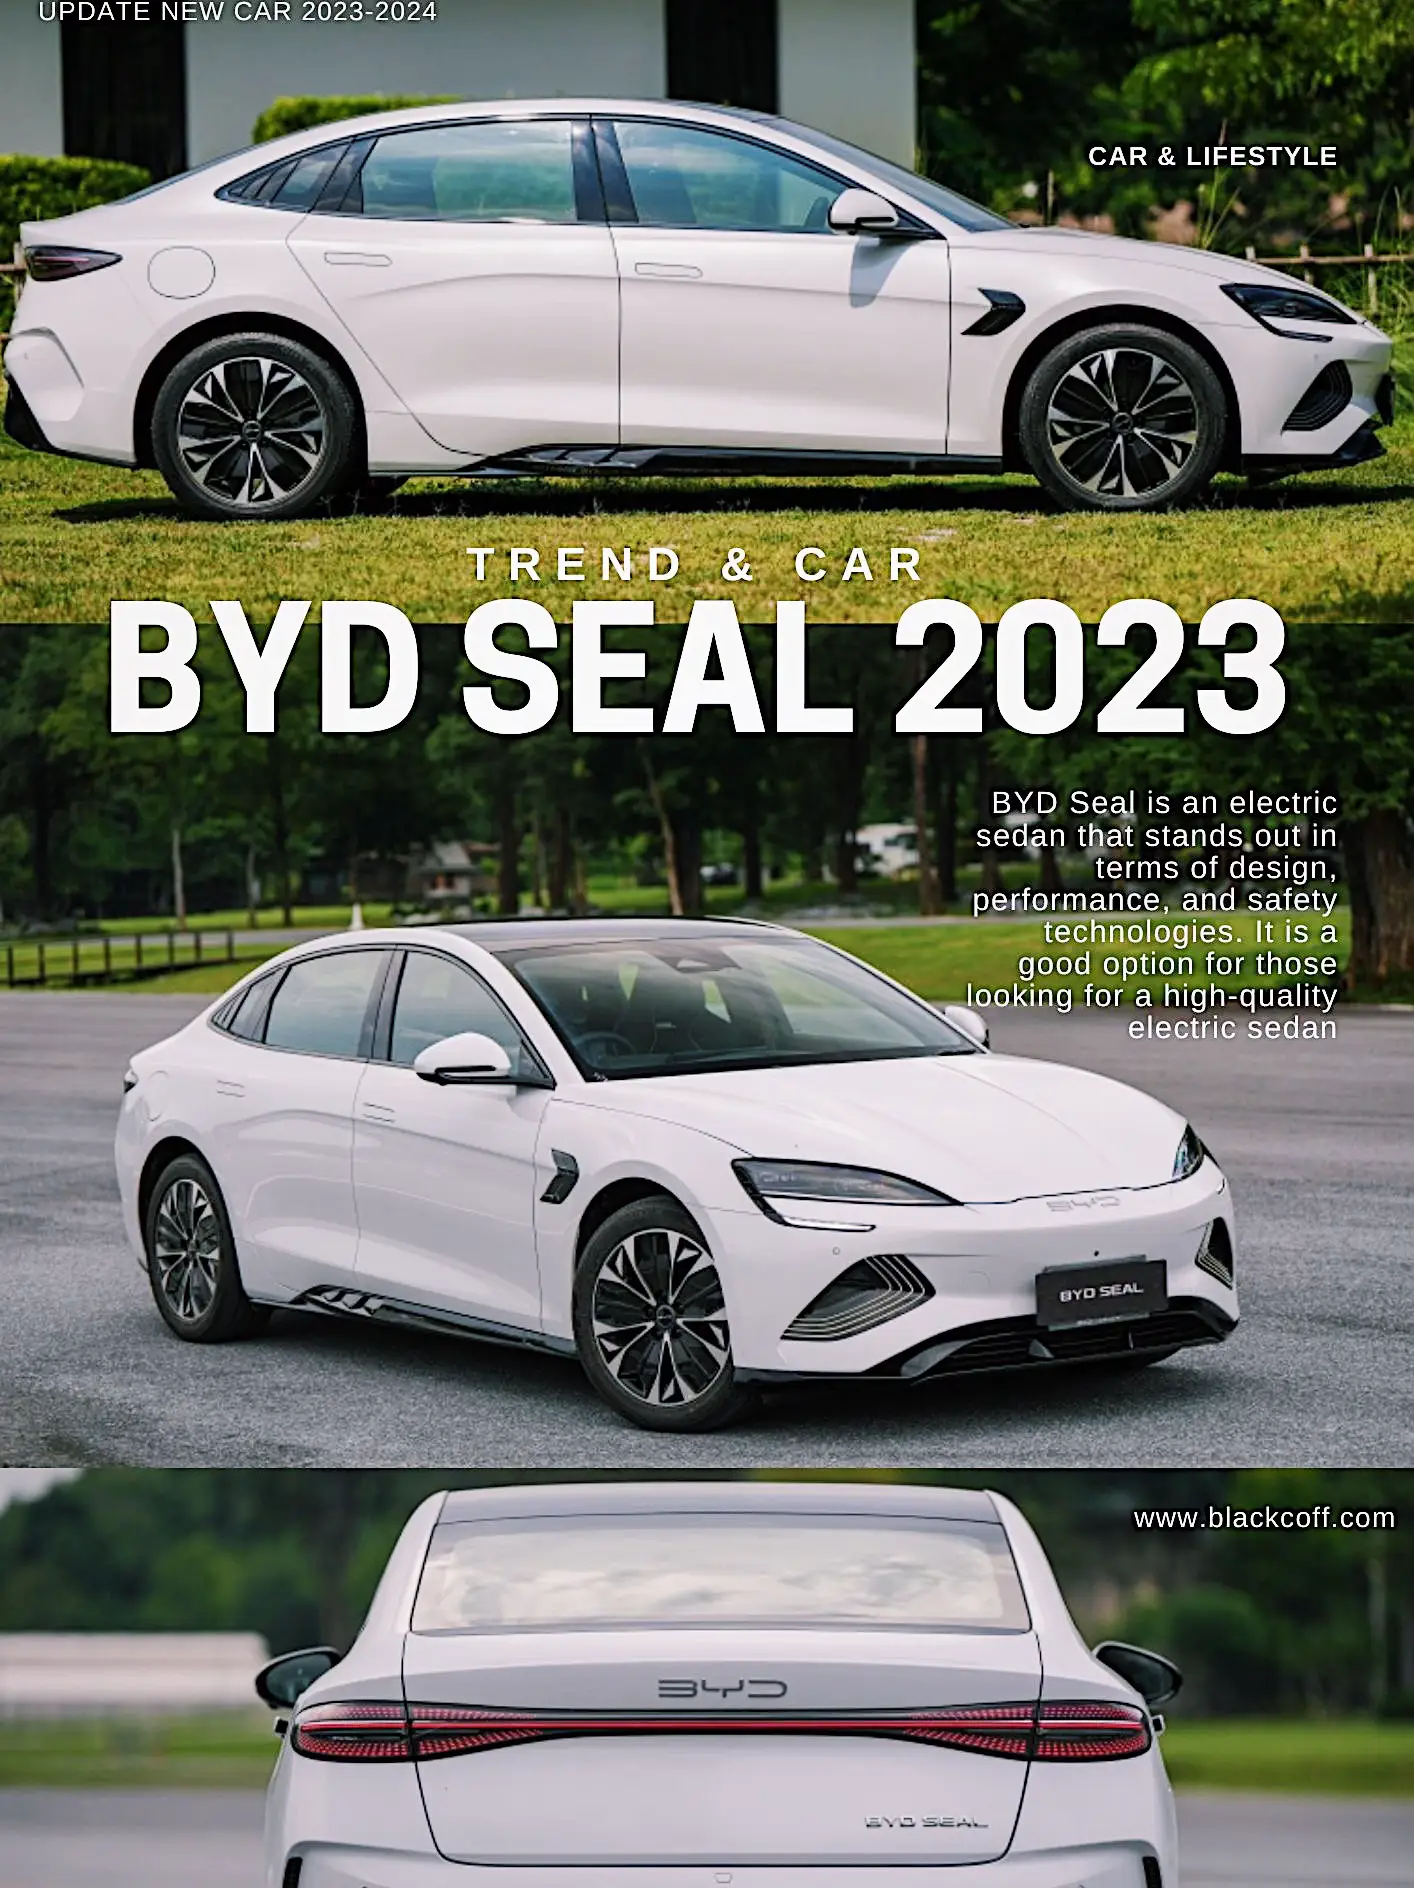 Byd seal 2023 electric car that hit the market stream has cracked the real  thing., Gallery posted by PIM